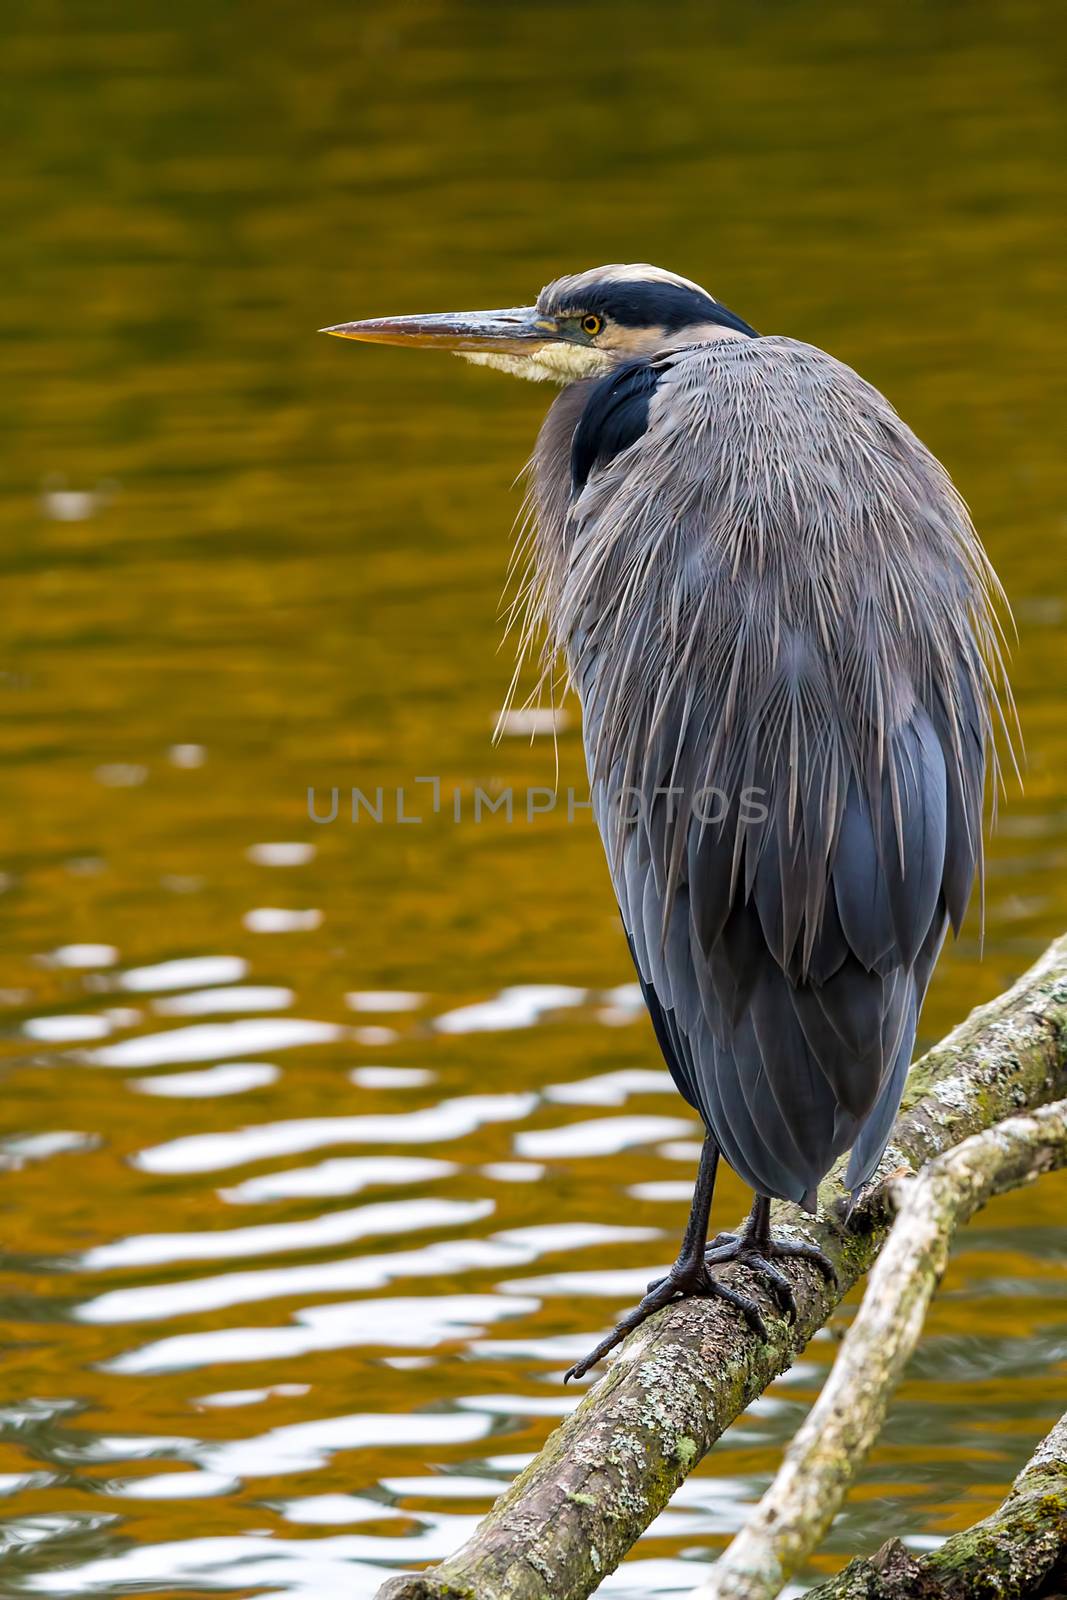 The Great Blue Heron perched on a tree branch by the lake at Crystal Springs Rhododendron Garden in Portland Oregon